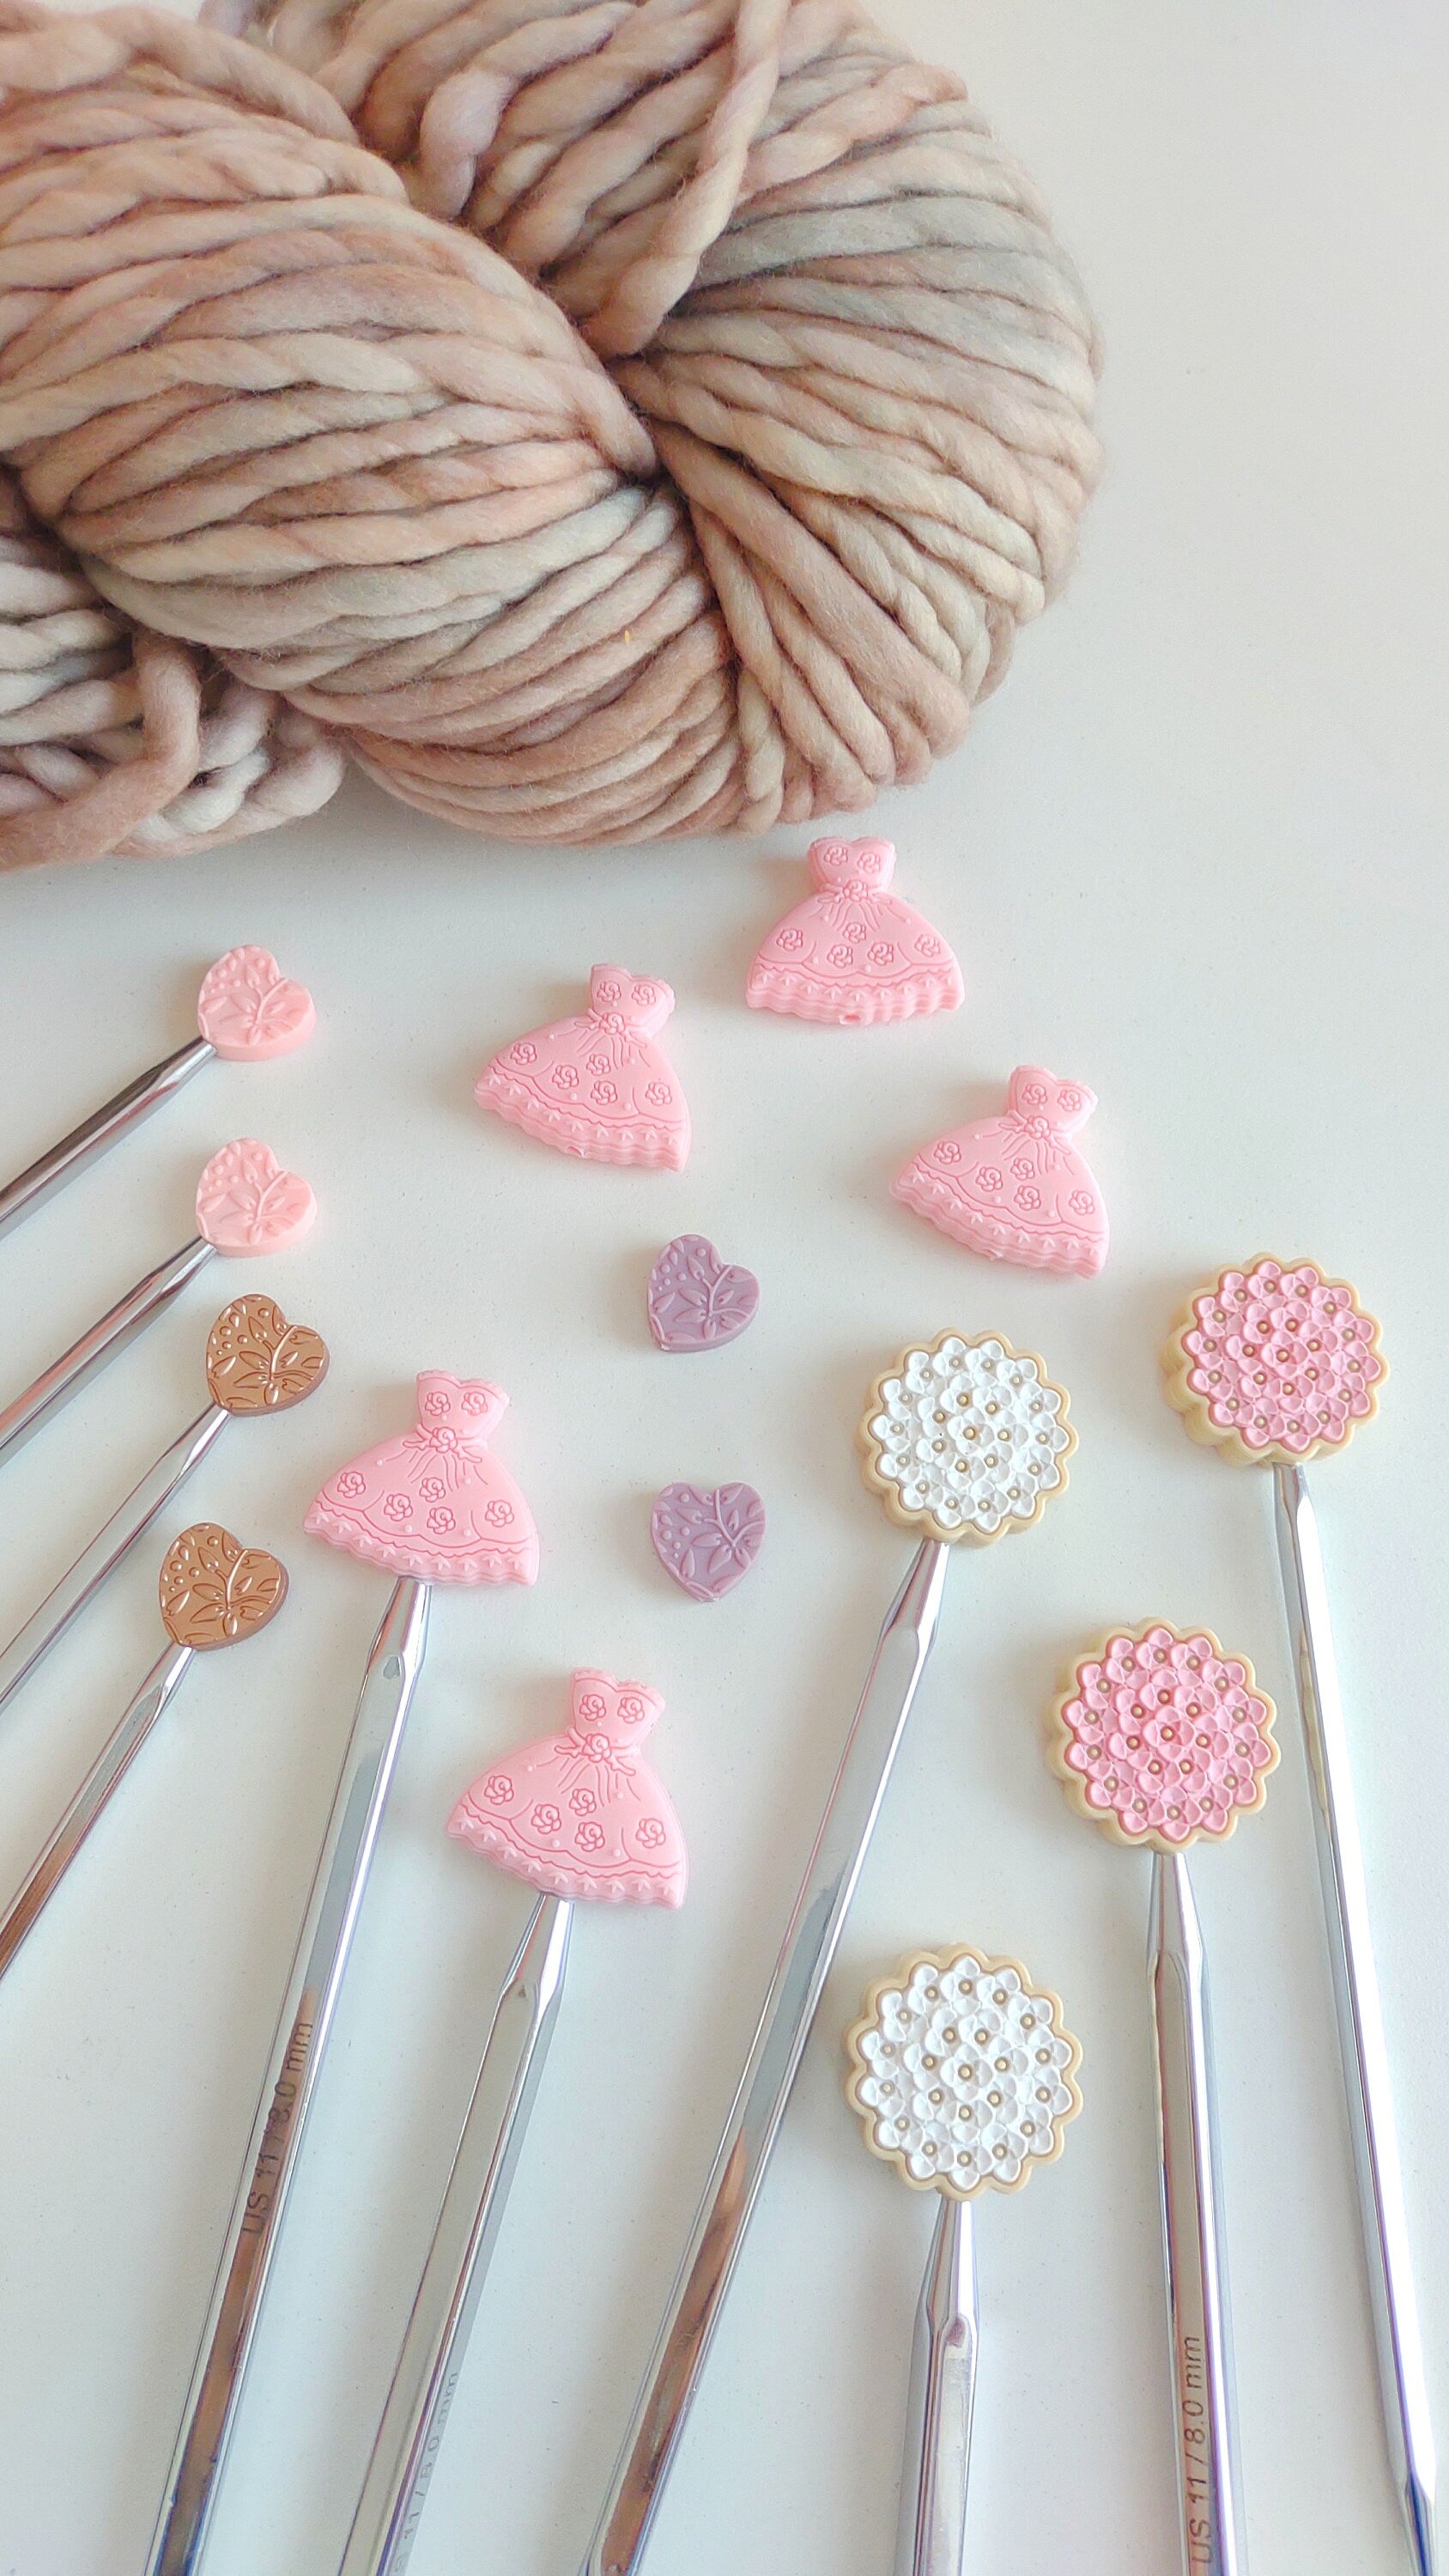 Light Pink Fancy Dress Knitting Needle Stitch Stoppers. Needle Protectors. Knitting Notions, Accessories, Supplies, Tools. Valentine's Day